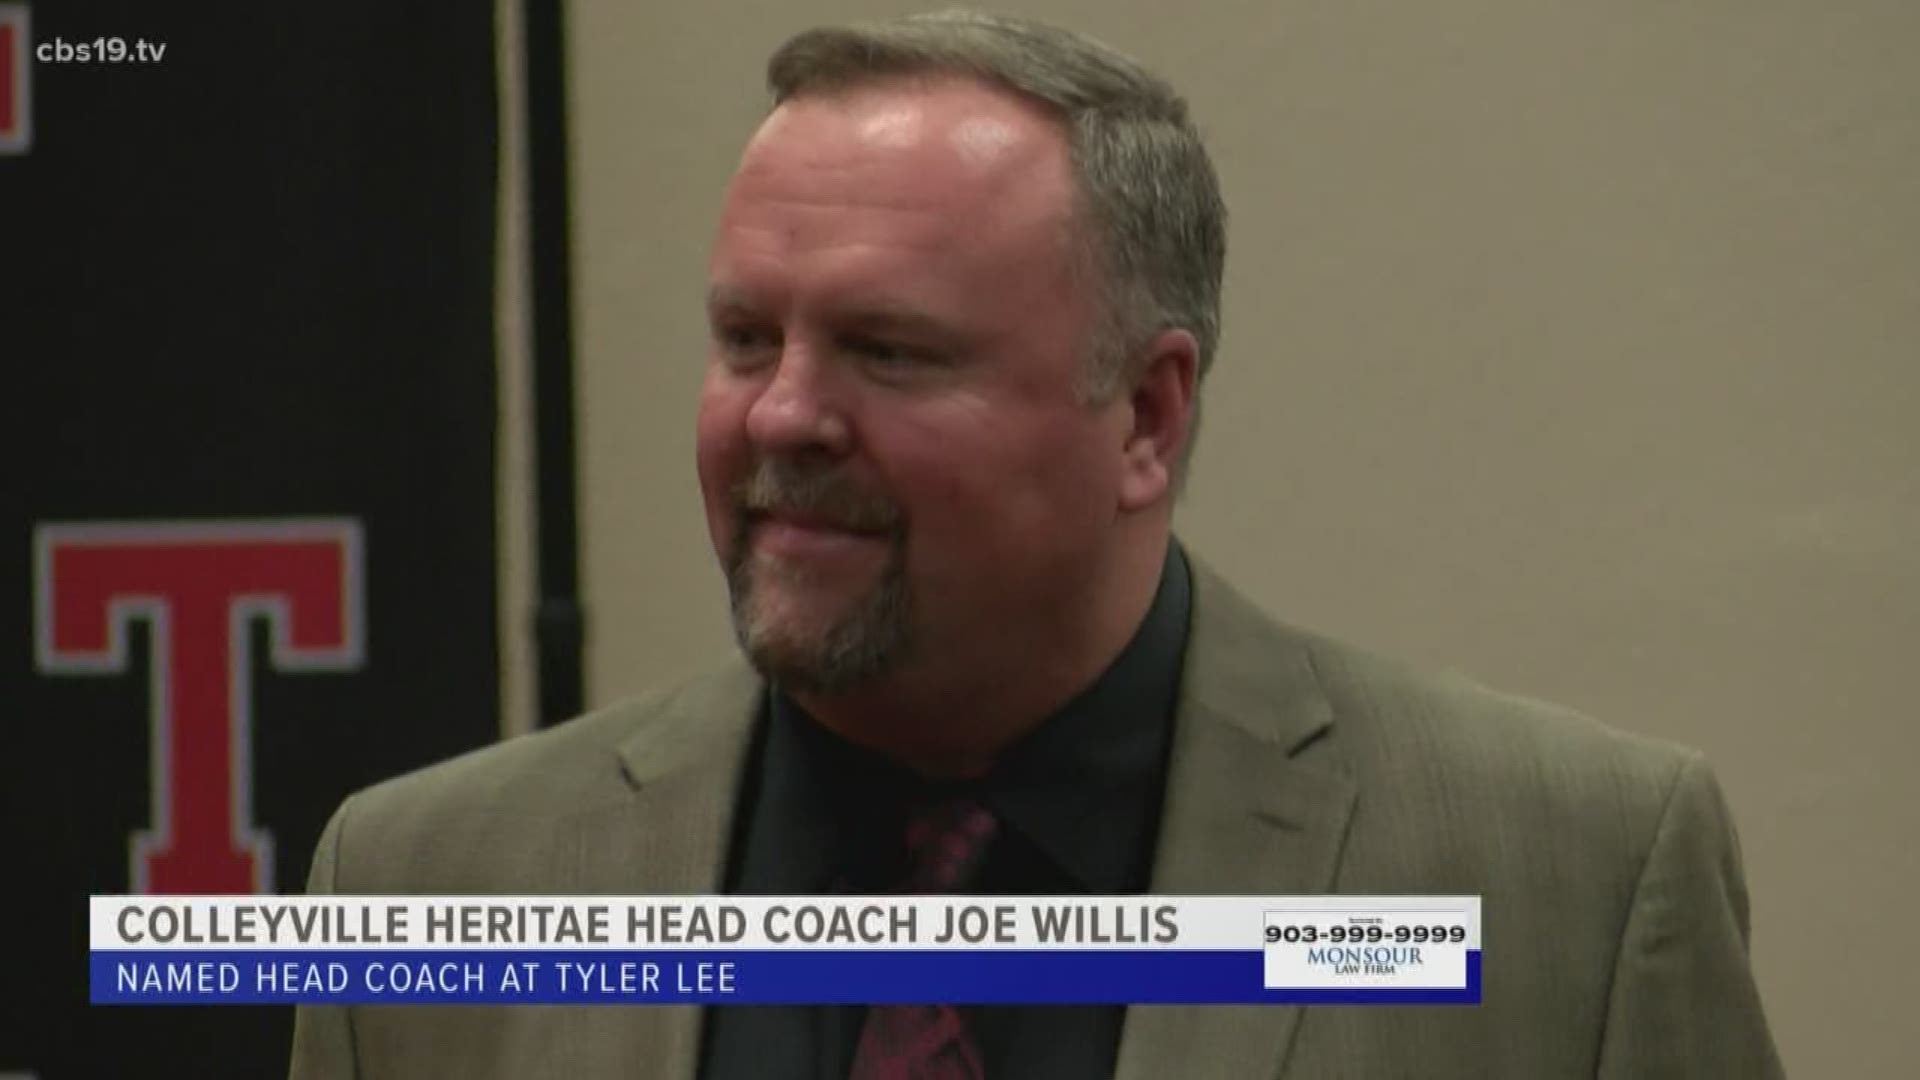 Willis, a graduate of East Texas Baptist University, has 27 years of coaching experience with 10 years as a head coach.